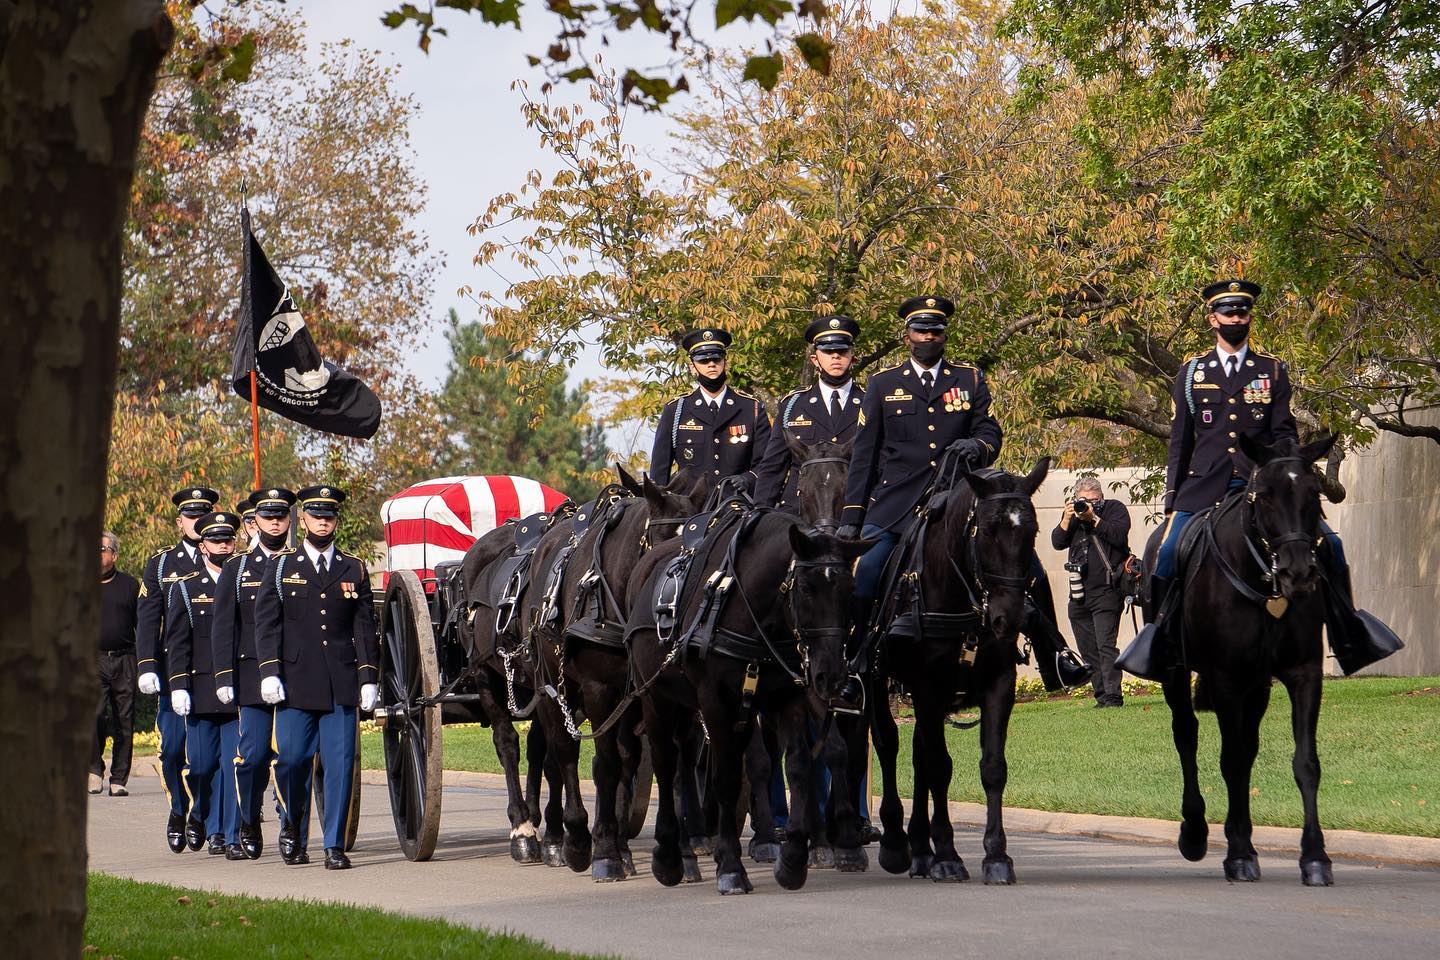 The caisson platoon conducts an average of 1,700 funerals per year between all five branches of the services. The honor is reserved for all officers, warrant officers, sergeant major (E-9, the highest enlisted rank), with priority given to those killed in the line of duty.

A typical caisson team consists of a minimum of seven horses, matched gray or black, four riders, and a serviceman displaying the colors of the deceased members branch of service. 

Six of the horses pull the caisson, three of which have riders. The three other horses are riderless. The two horses closest to the caisson are called the wheel horses, and these are the most experienced horses and act as the brakes. The two front horses are the leads, and they are the second most experienced. The two middle horses are called the swings, and they are the least experienced. The seventh horse, which has a rider, is the guide horse.

The seventh horse is ridden off the team to allow the section chief to move independently, ensuring that the designated route is clear, and to coordinate with the marching troops prior to the funeral service. In battles, the horses on the right side were used for carrying provisions and replacing a main horse if needed. 

Caissons were used to carry the wounded and deceased from the battlefield as well as hauling ammunition. The field artillery used a six-horse hitch, and today, the platoon uses their equipment, tack, techniques, and training methods laid out in the artillery manual printed by the Army in 1942.

PC: @arlingtonmedia